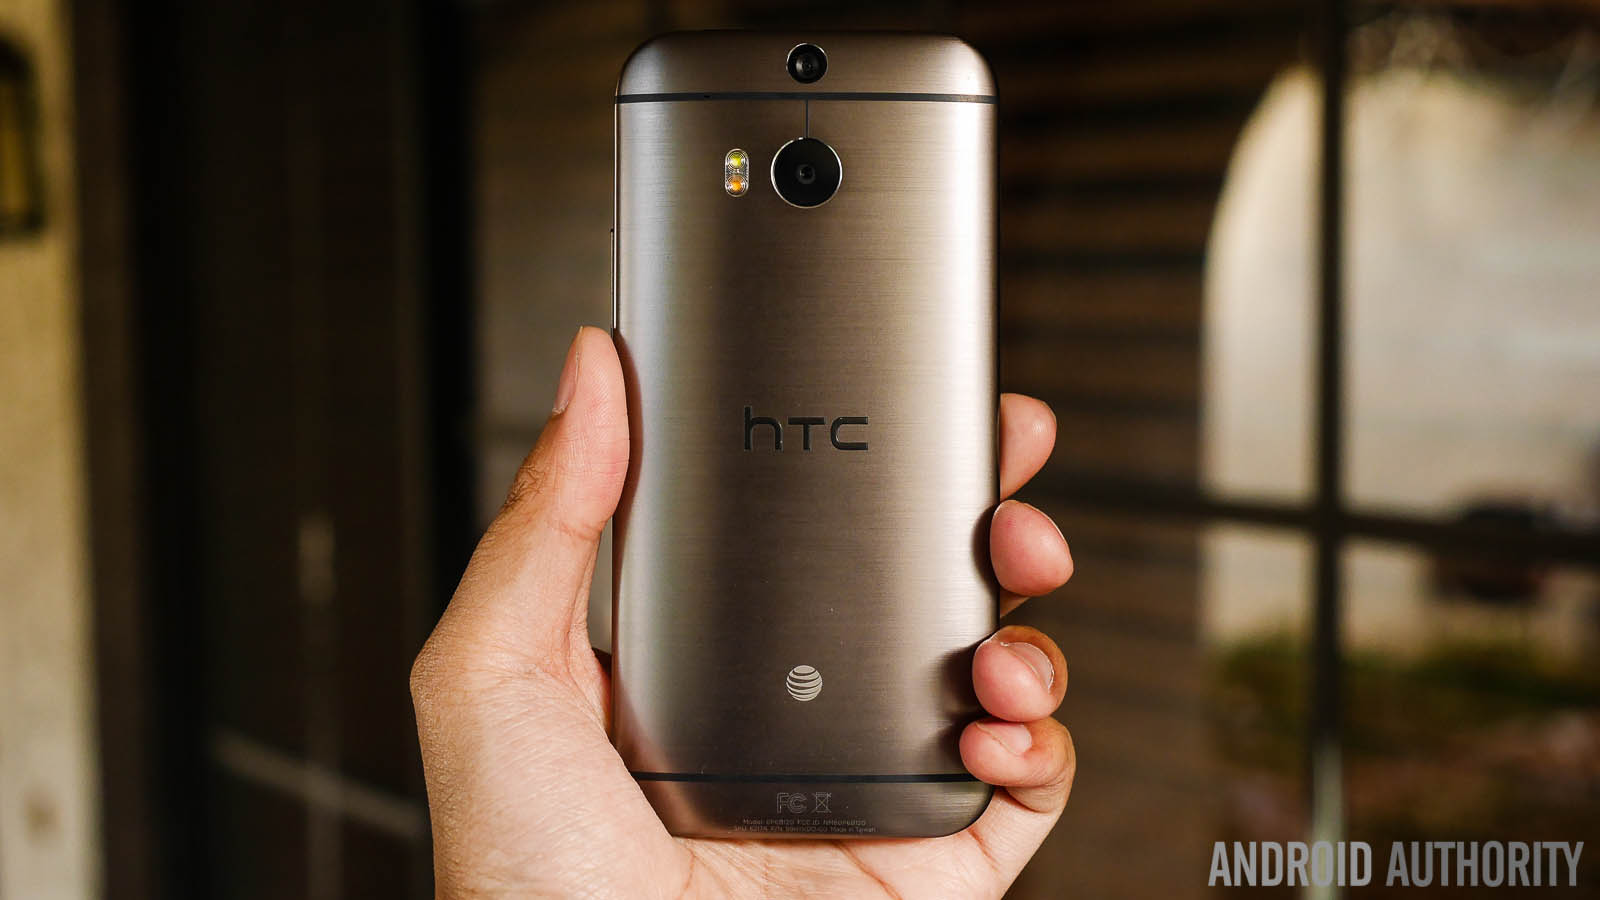 HTC One M8 updated with Eye Experience software